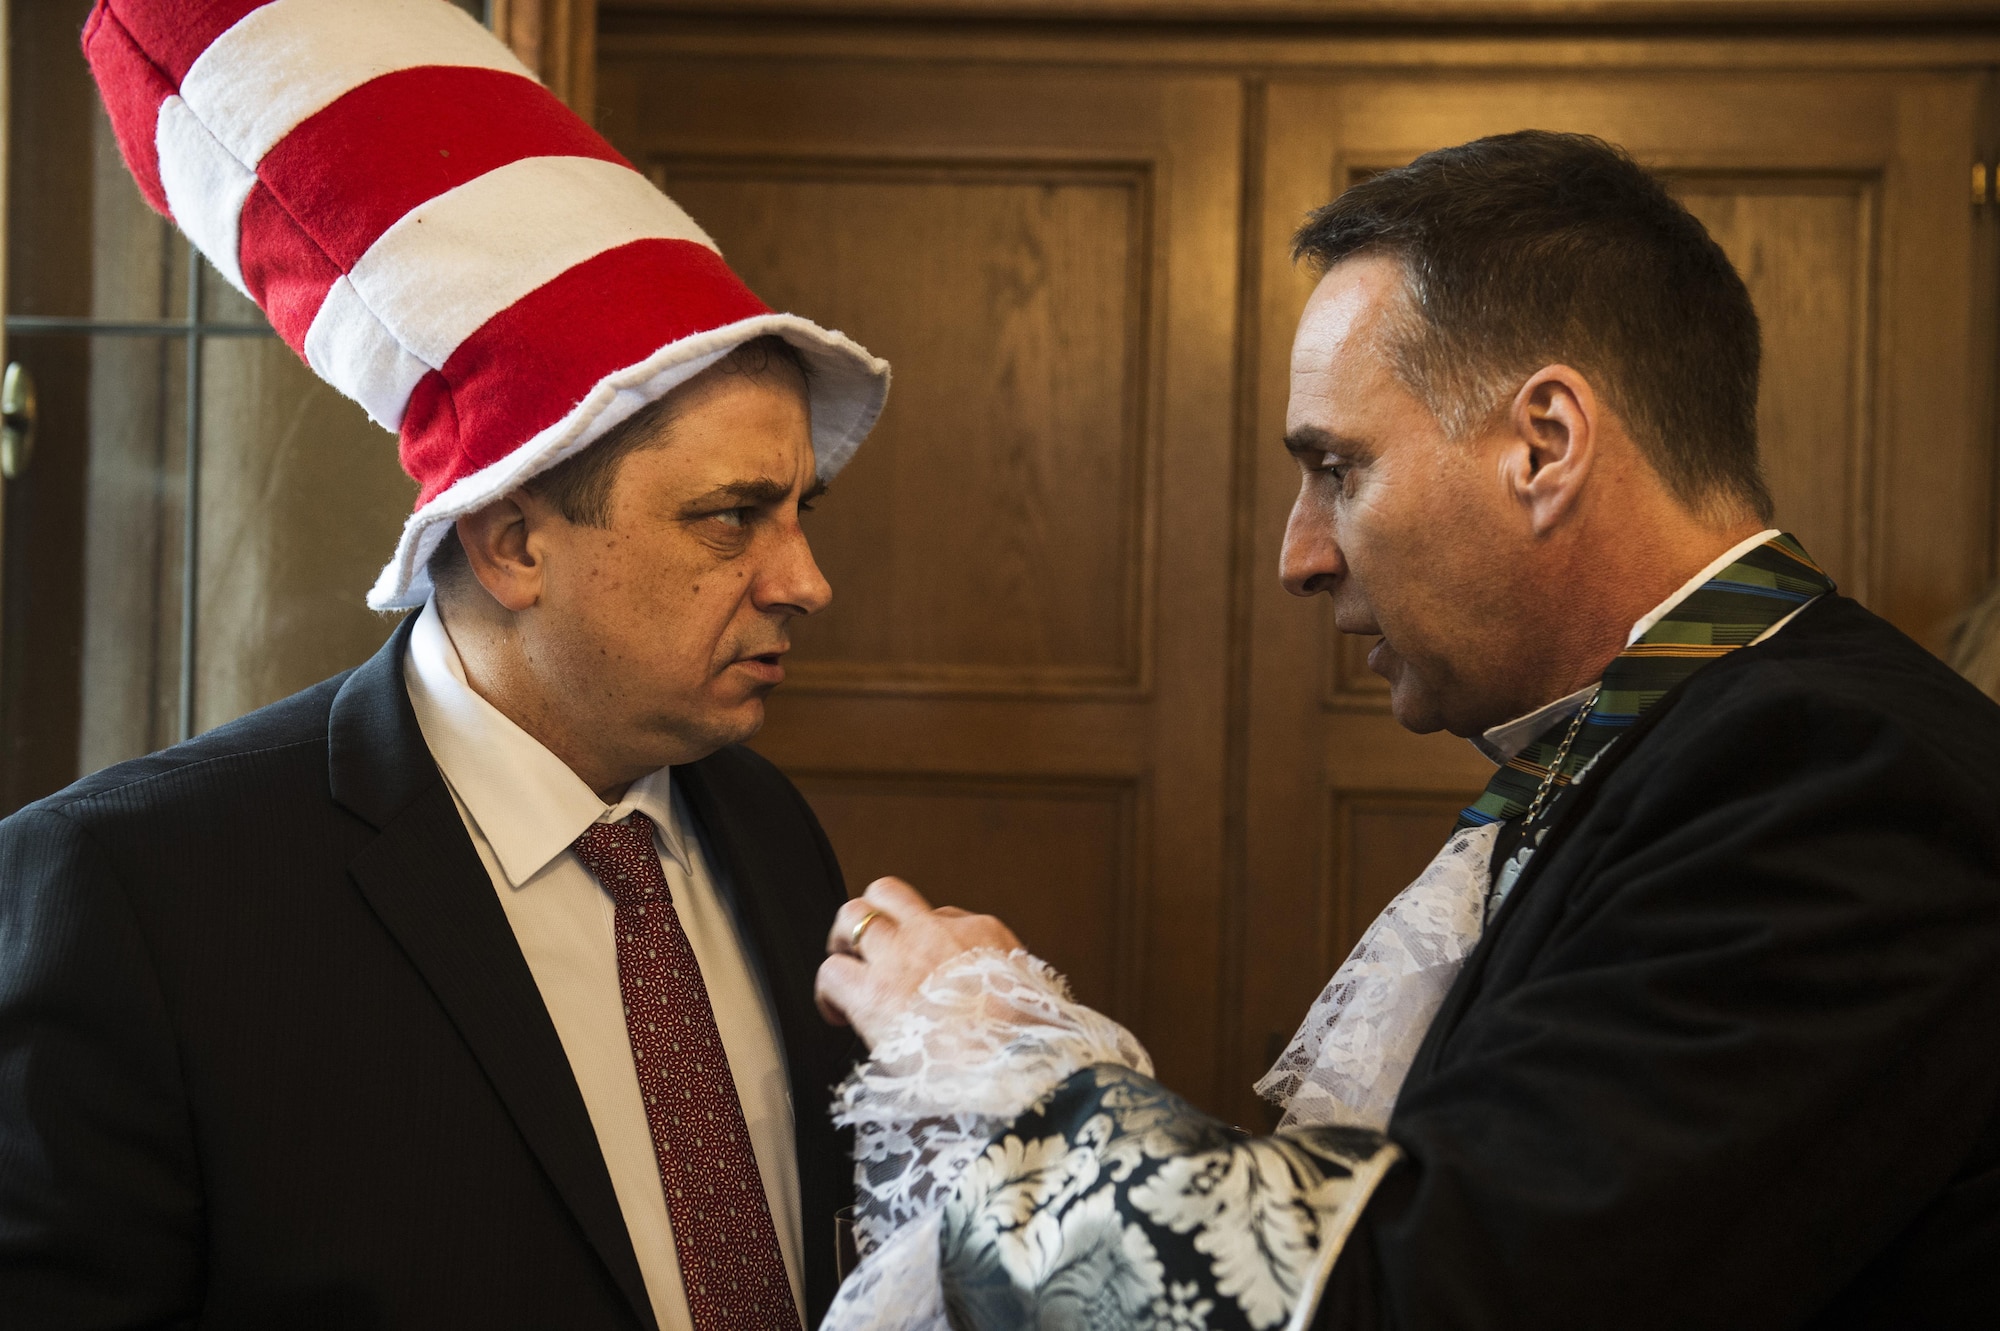 Col. Steven Zubowicz, left, 52nd Mission Support Group commander, talks with Joachim Rodenkirch, right, mayor of Wittlich, at city hall during a Fasching celebration in Wittlich, Germany, Feb. 23, 2017. The celebration included a tradition of female citizens storming the city hall to seize control of the community for the day. (U.S. Air Force photo by Staff Sgt. Jonathan Snyder)